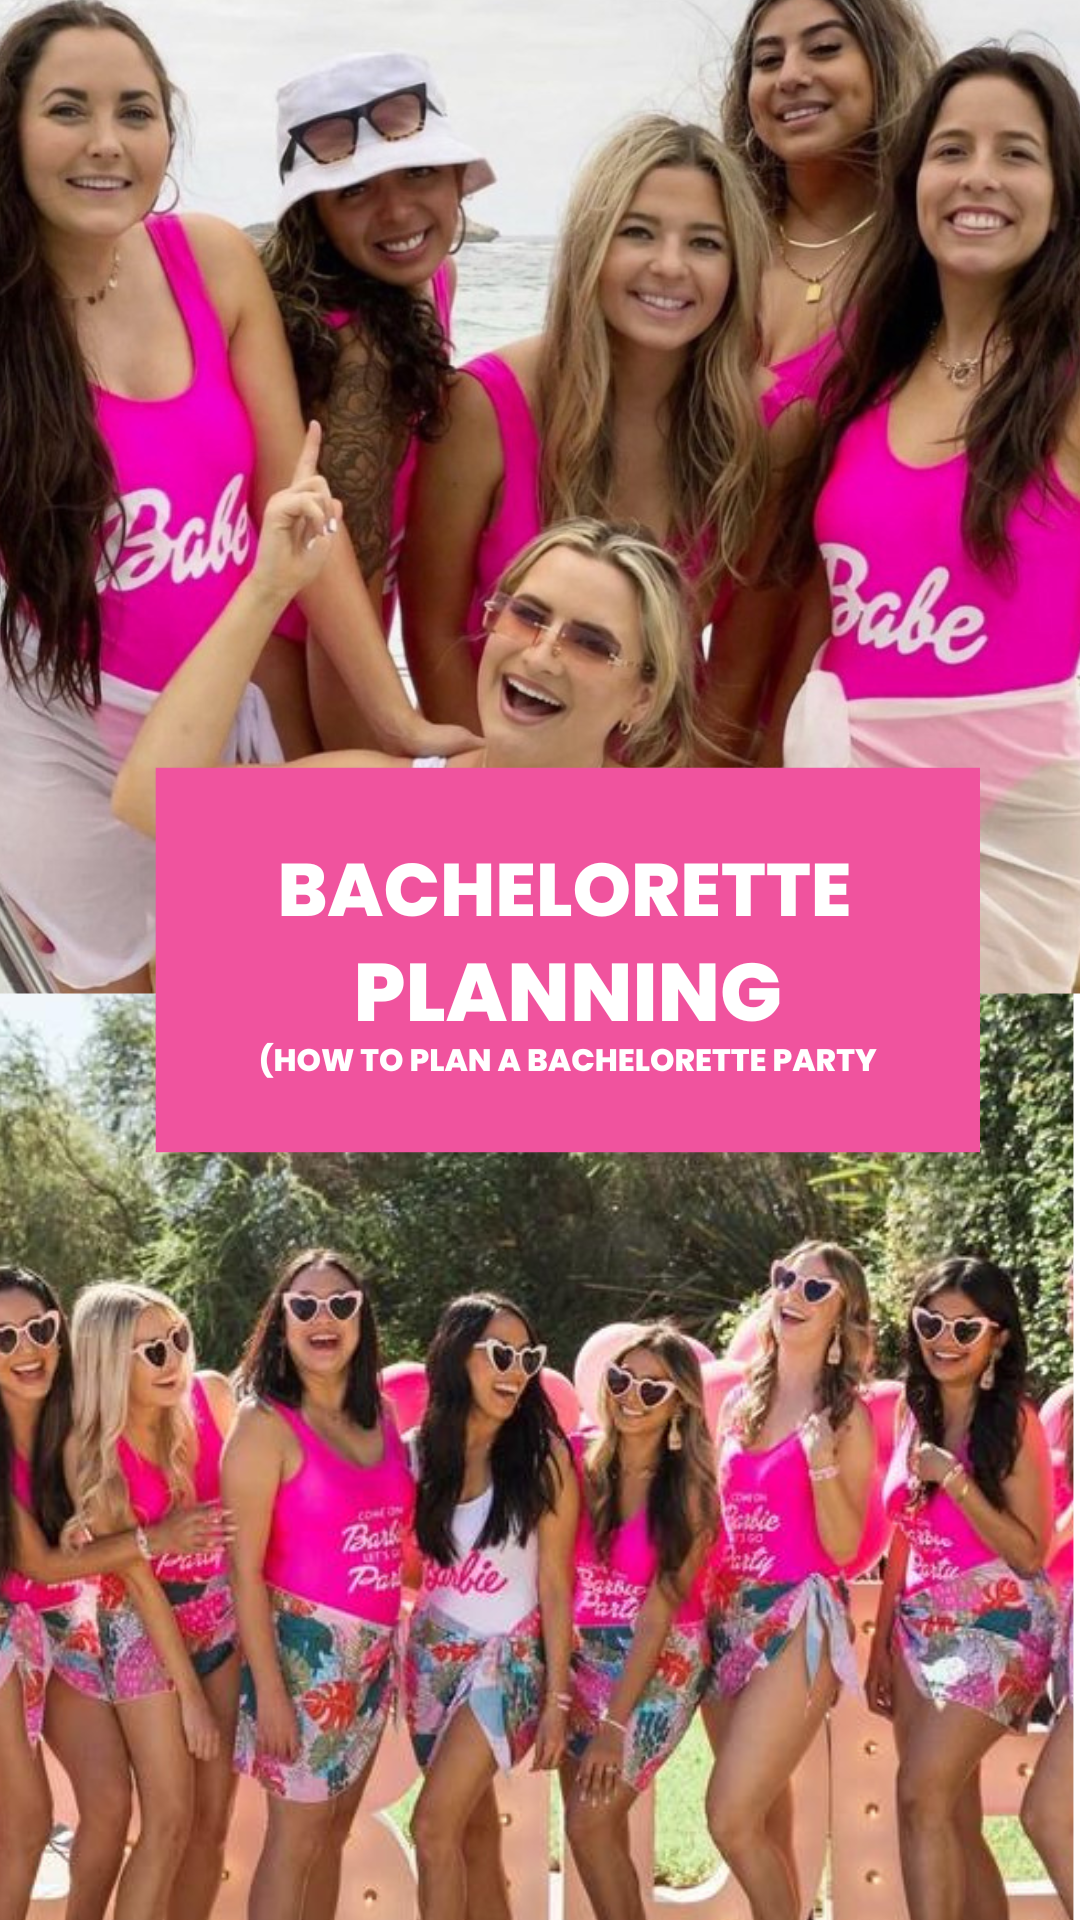 How to Plan a Bachelorette Party